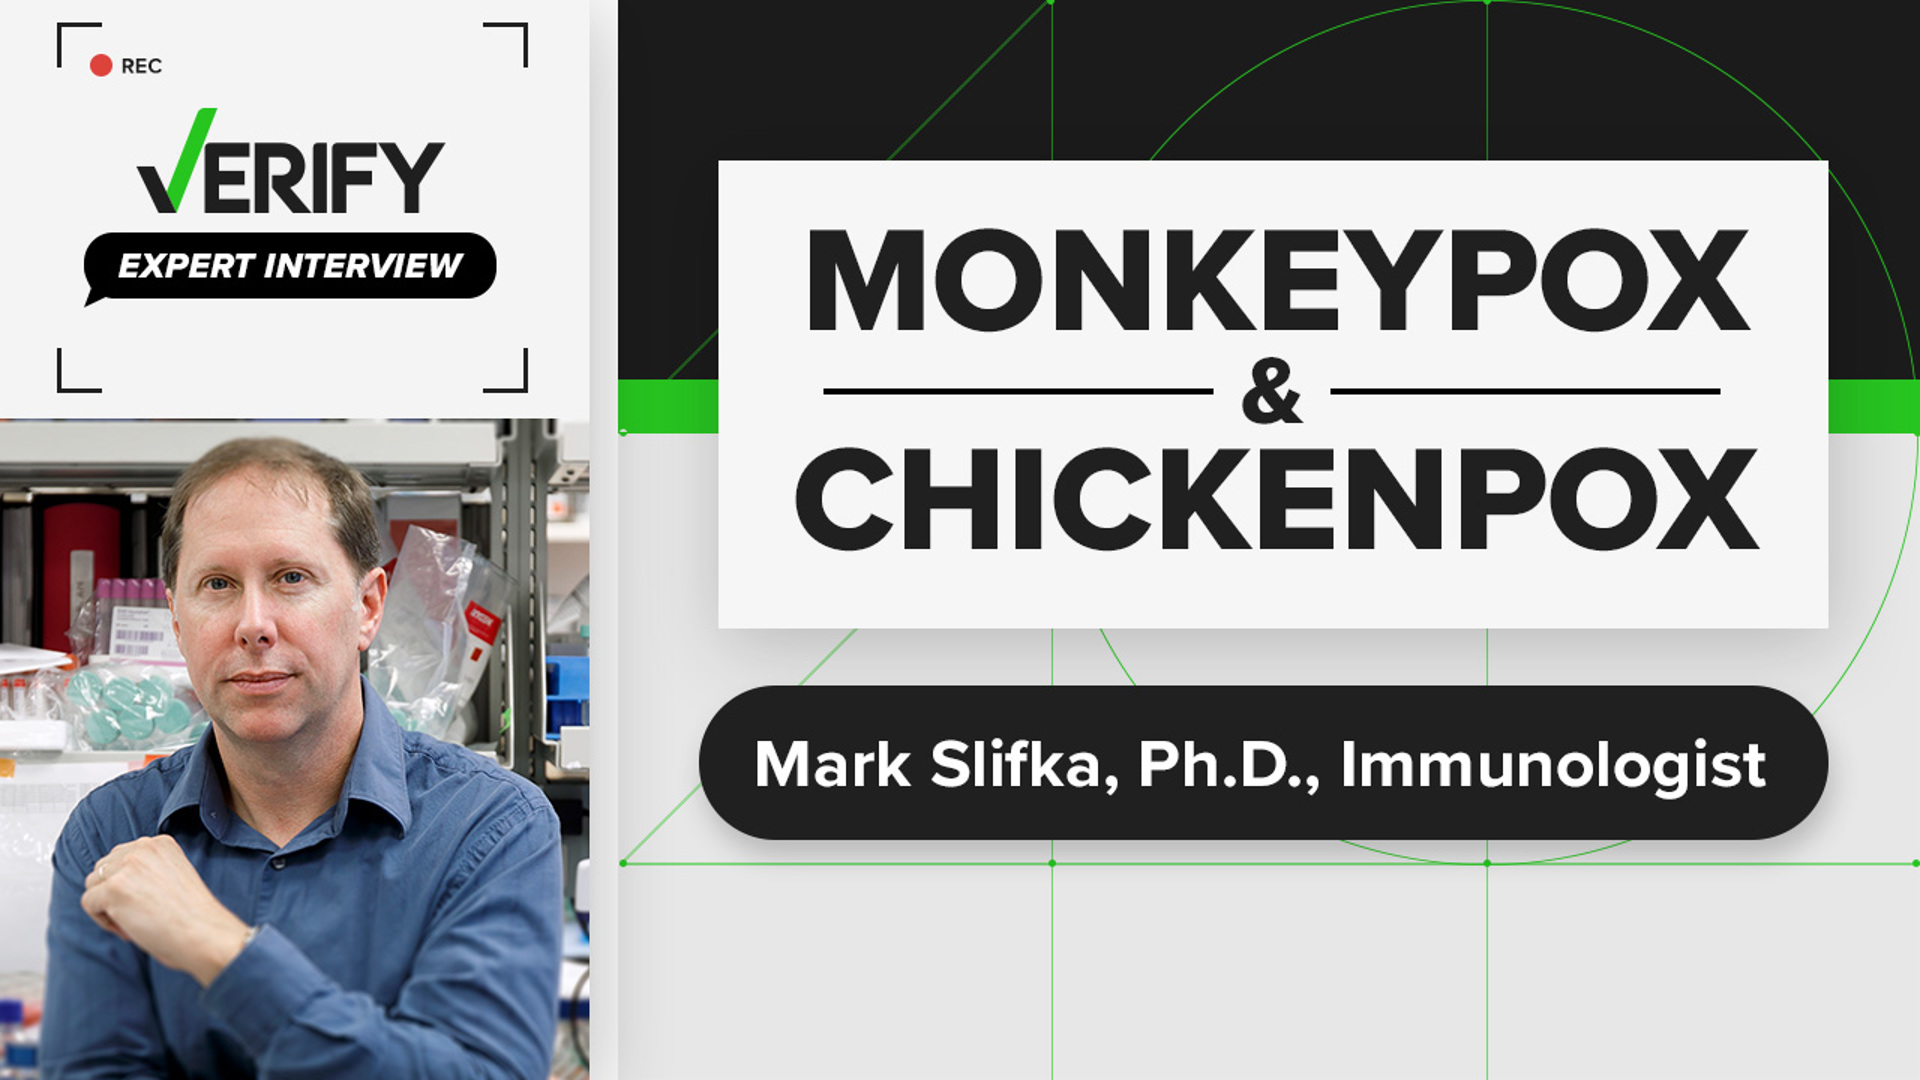 Immunologist Mark Slifka, Ph.D., talks about chickenpox and monkeypox. As well as mortality rate, people who could be most at risk and the greatest